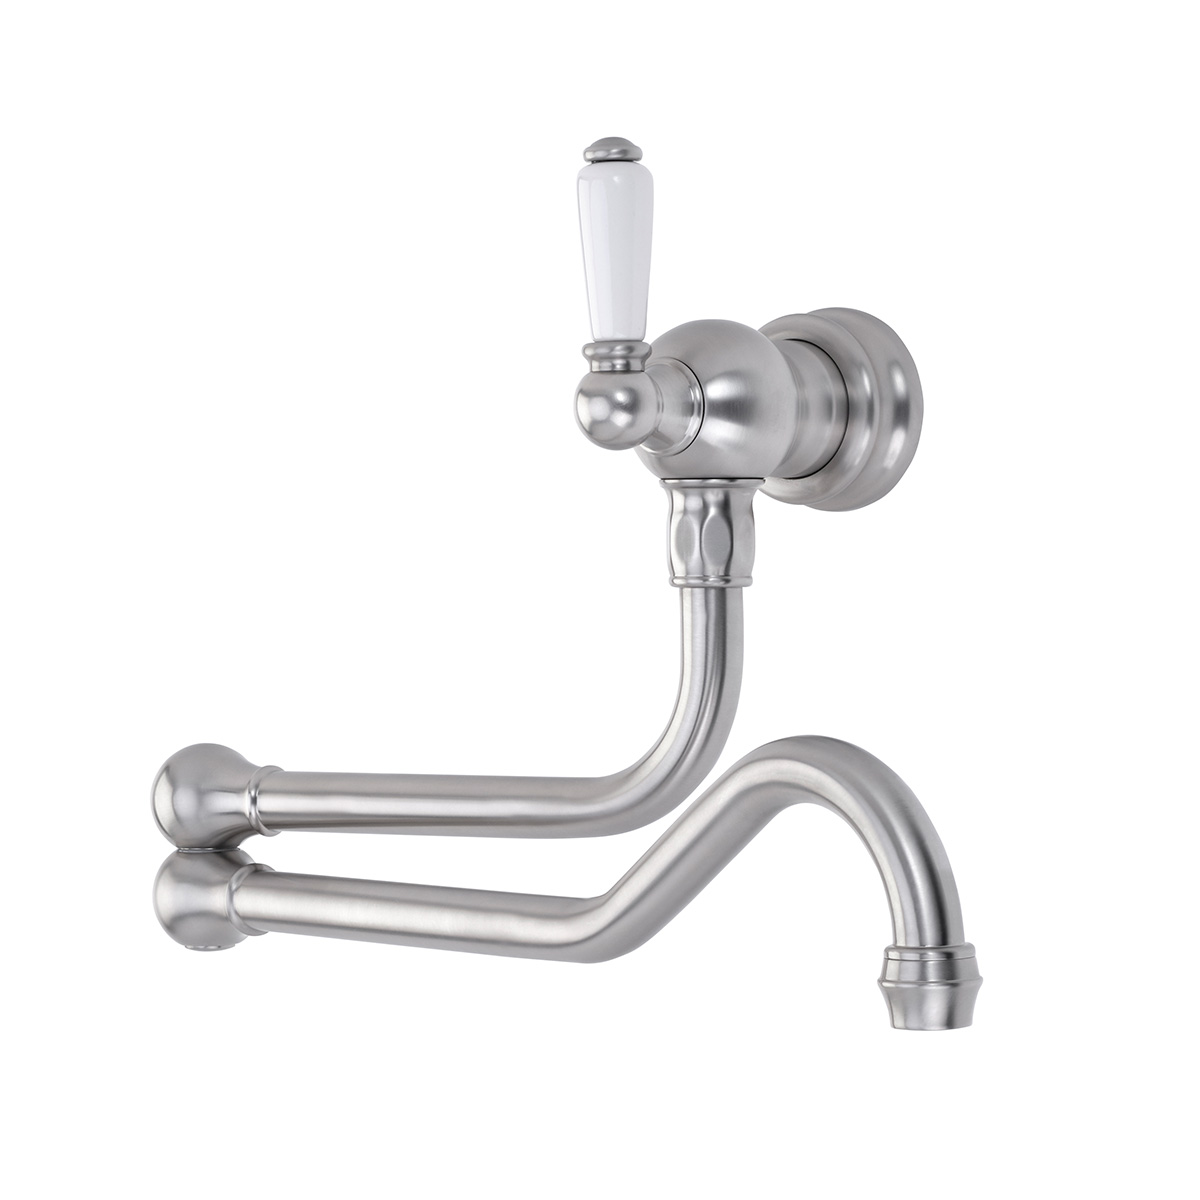 Shaws by Perrin & Rowe wall mounted pot filler in Pewter. Traditional style pot filler with single white porcelain handle - AUSH.4417. Distributed in Australia by Luxe by Design, Brisbane.